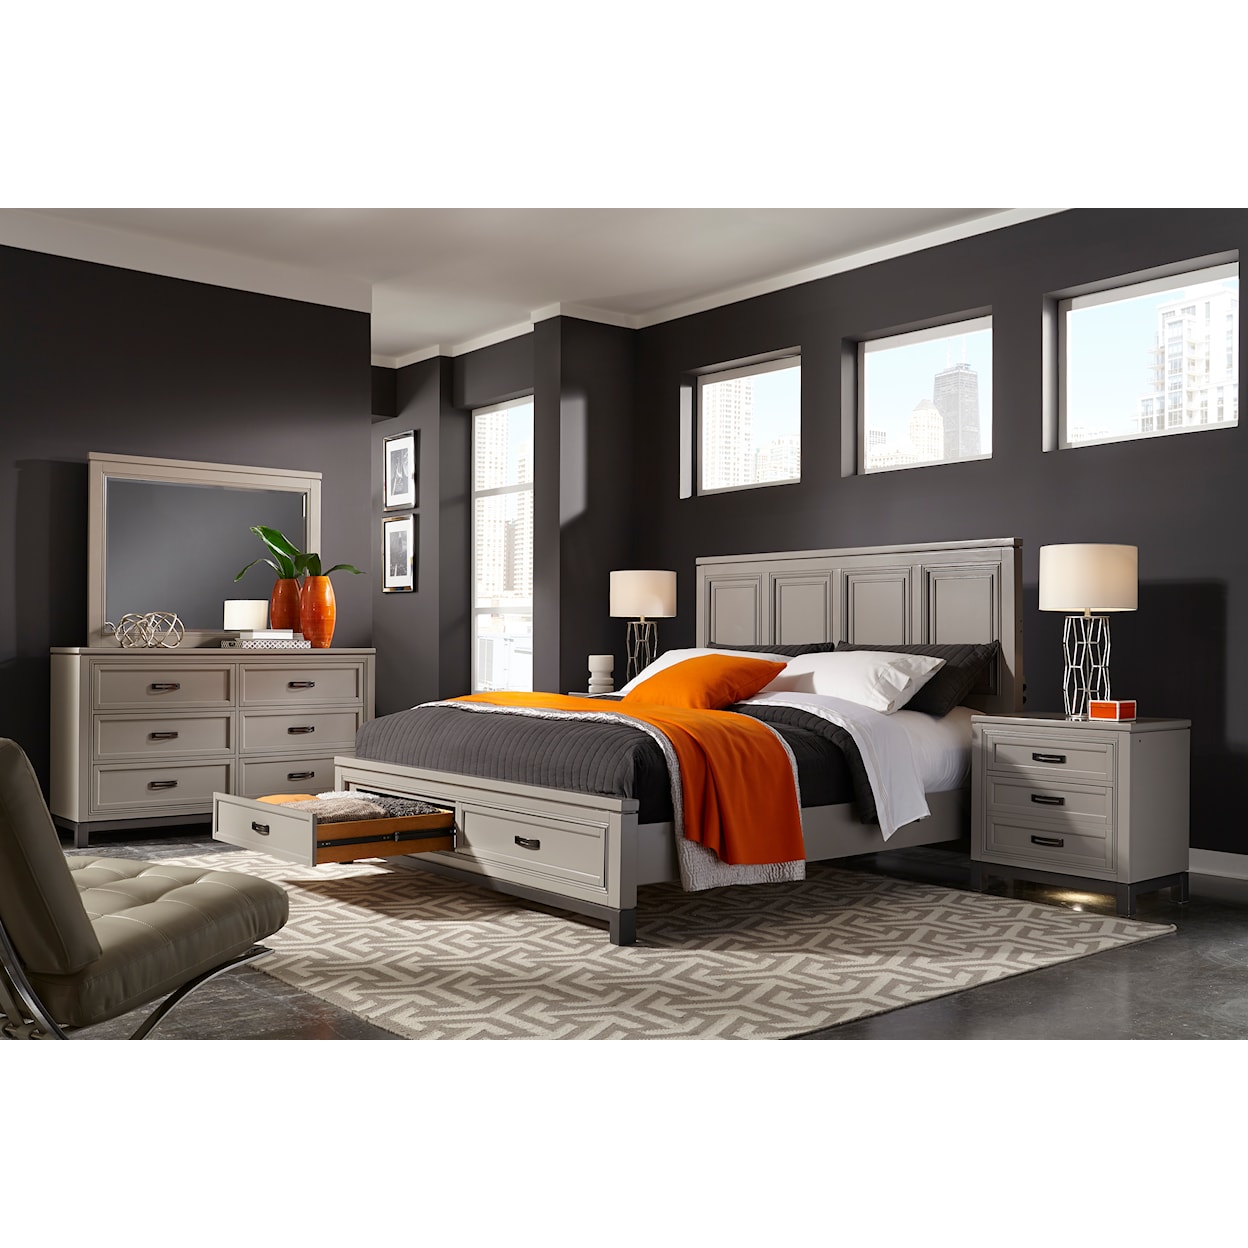 Aspenhome Hyde Park Queen Painted Panel Storage Bed